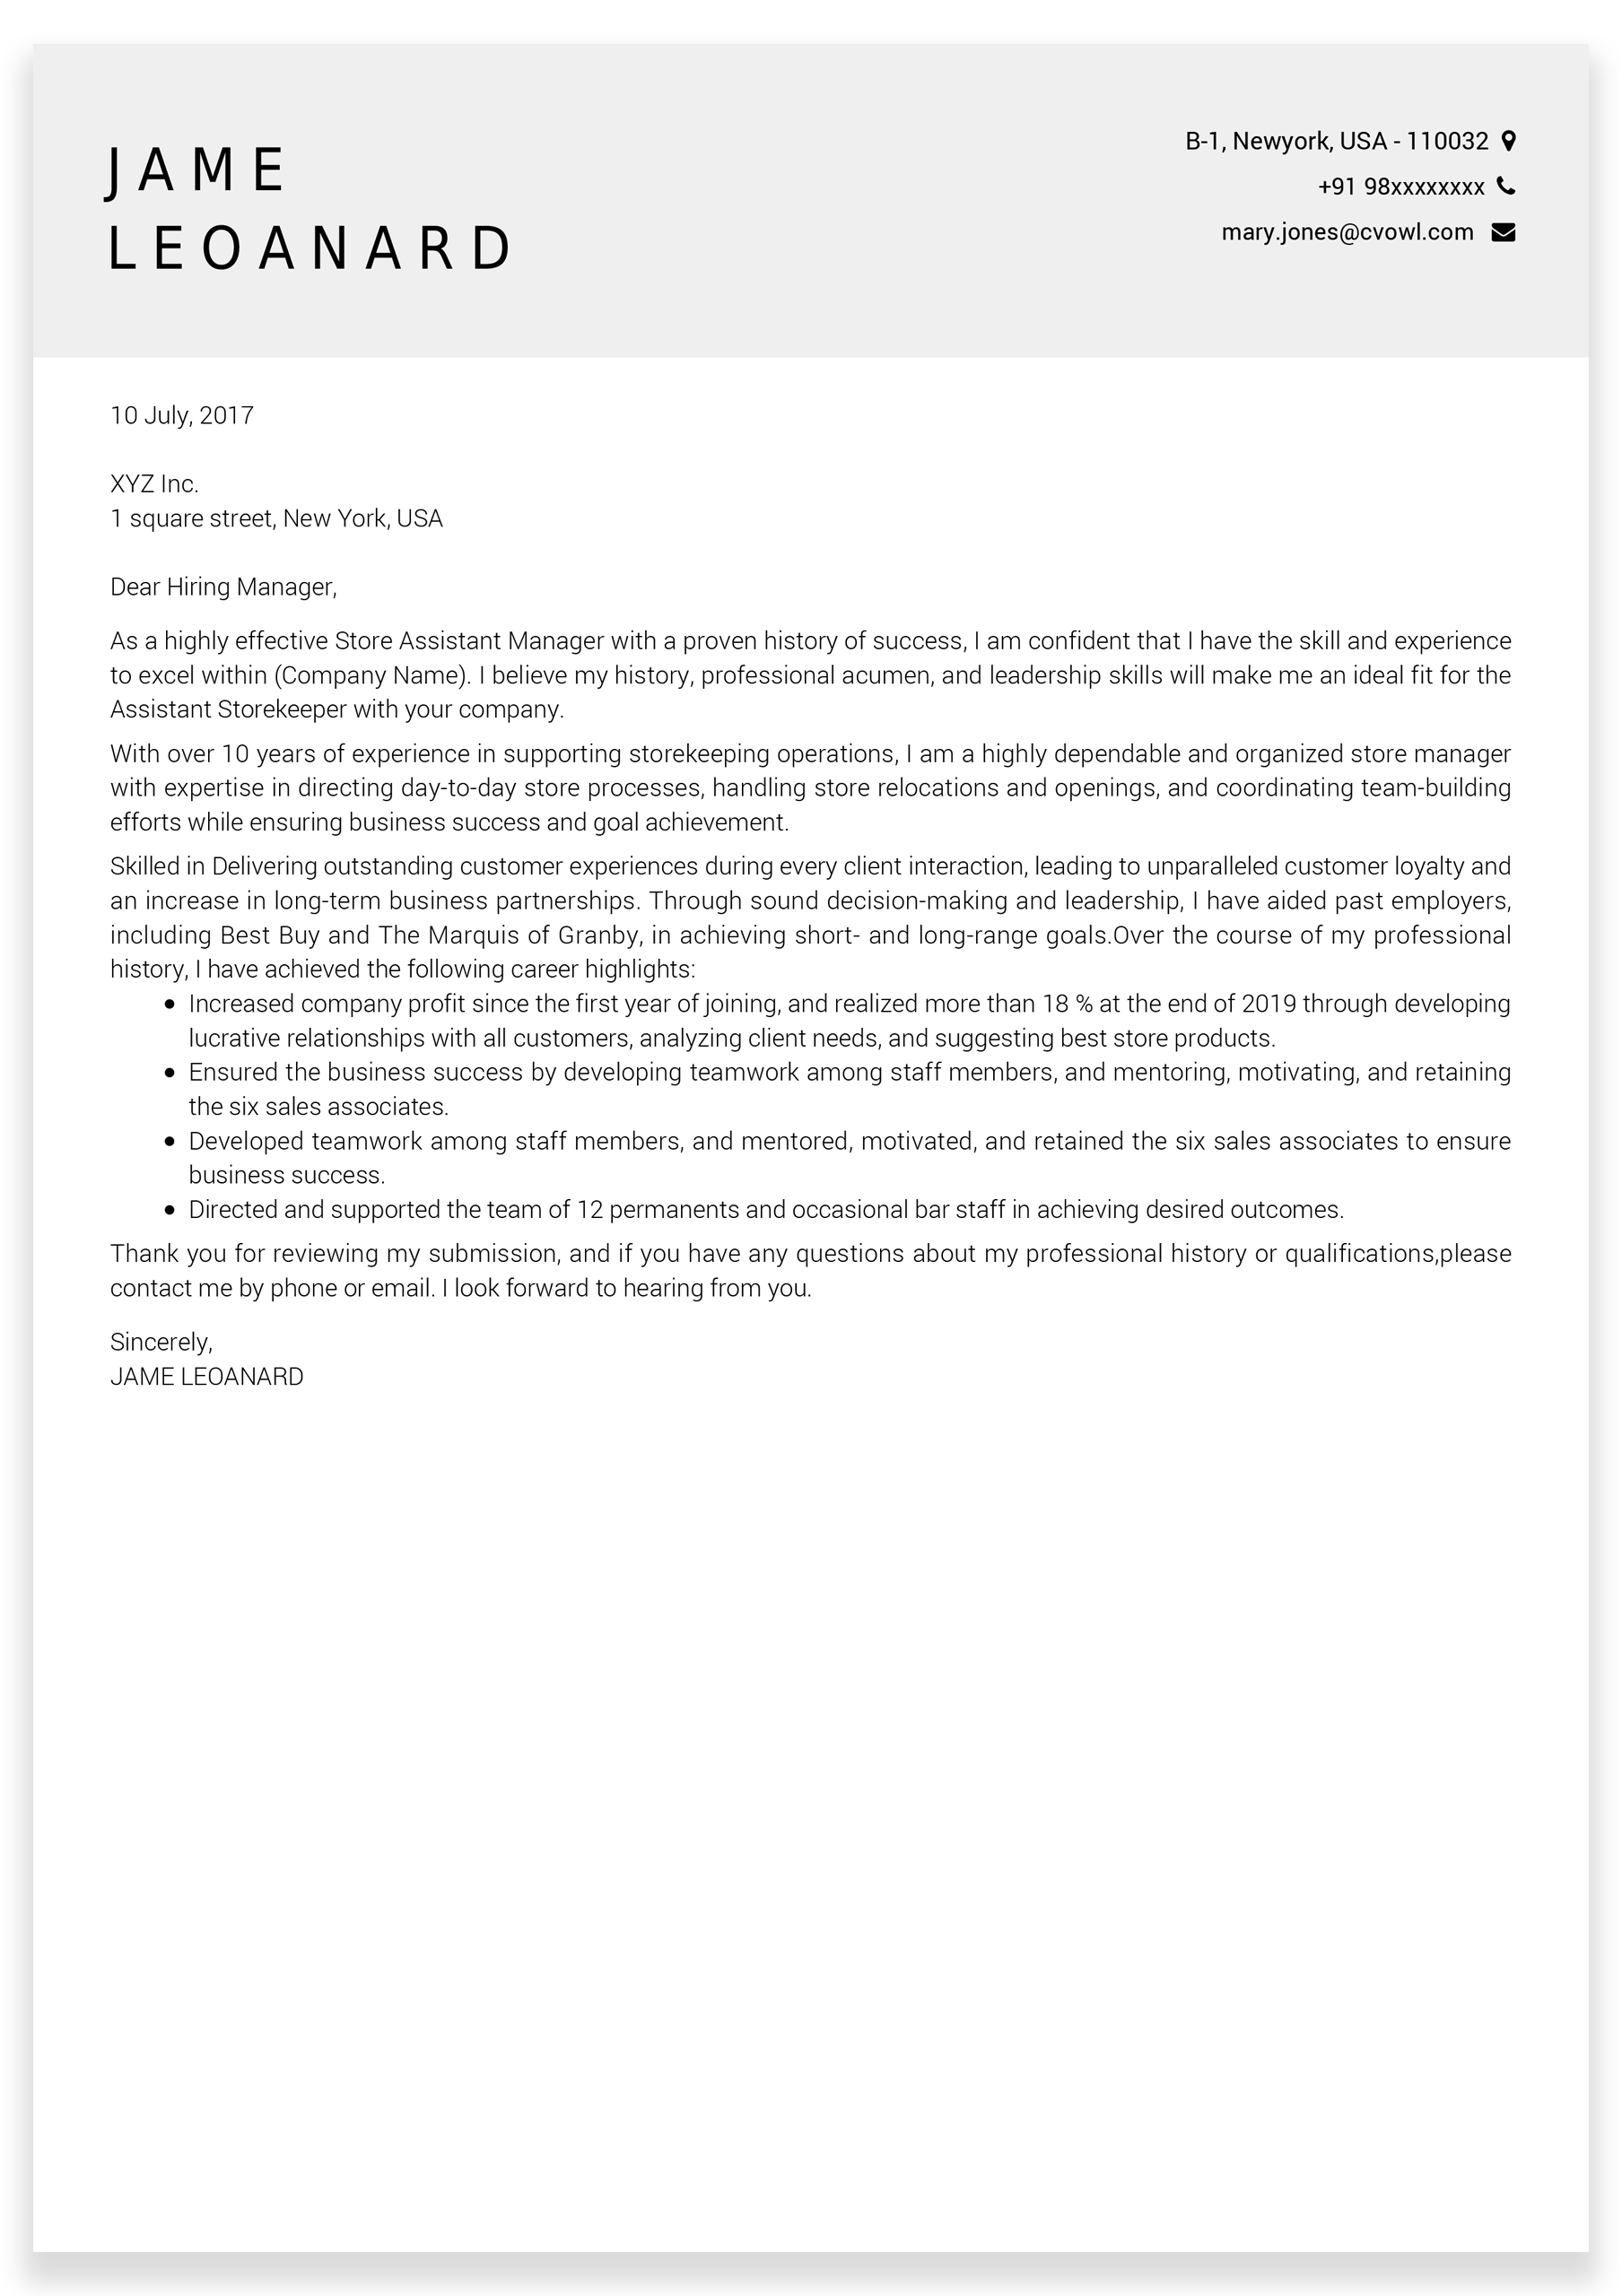 Manufacturing-Engineer-Cover-Letter-sample4